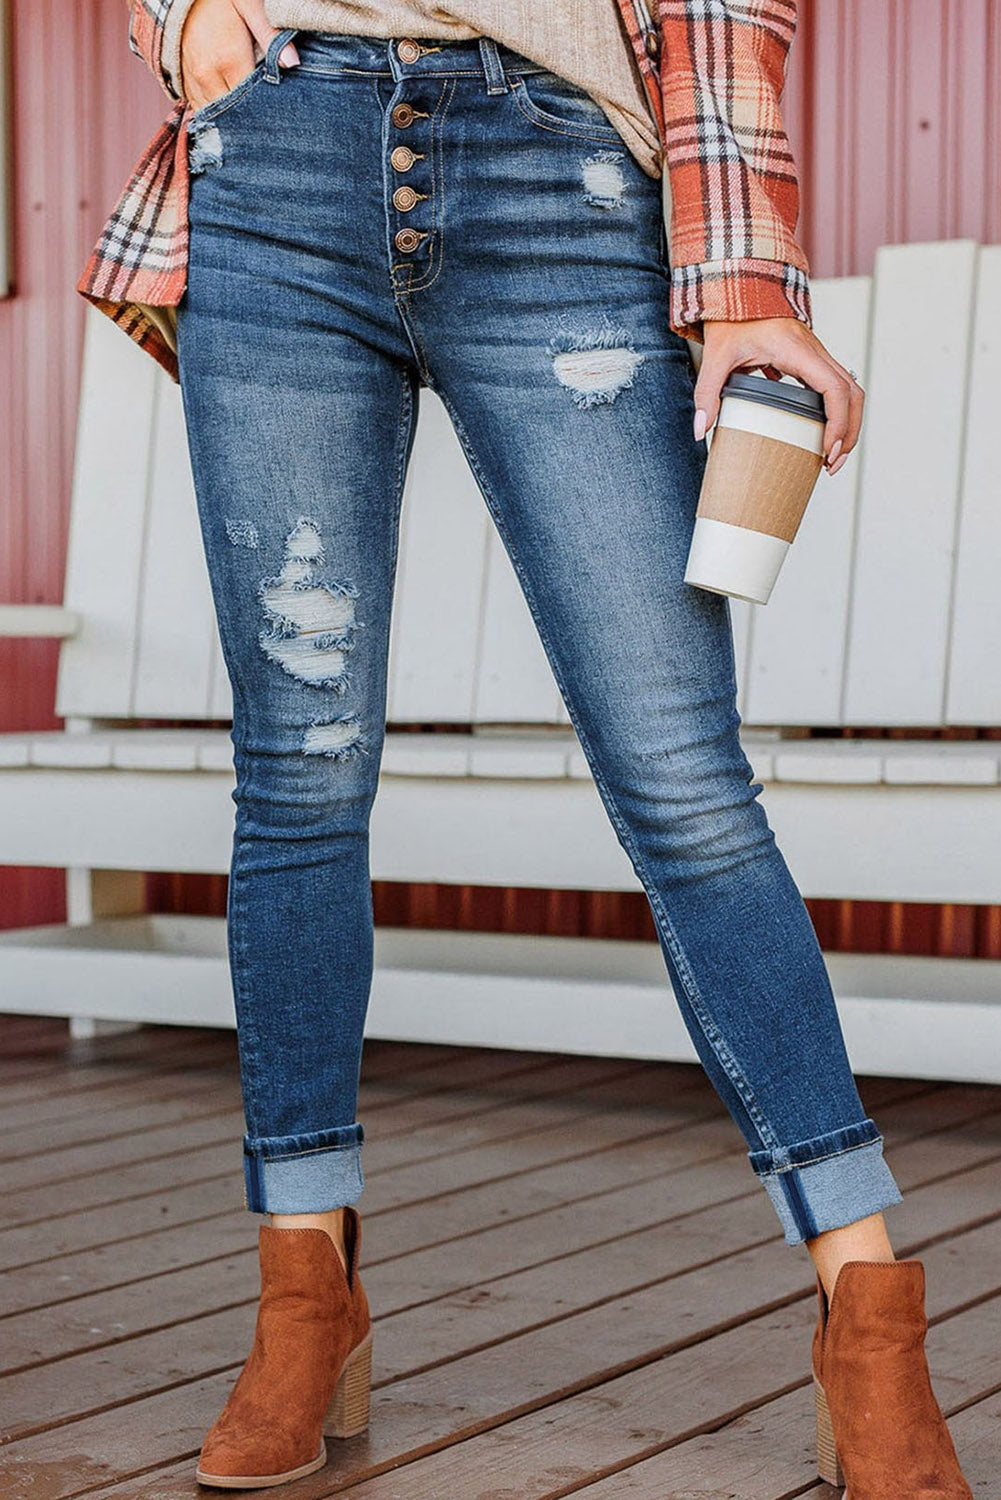 TRAVELING GYPSY- Button Fly High Waist Skinny Jeans